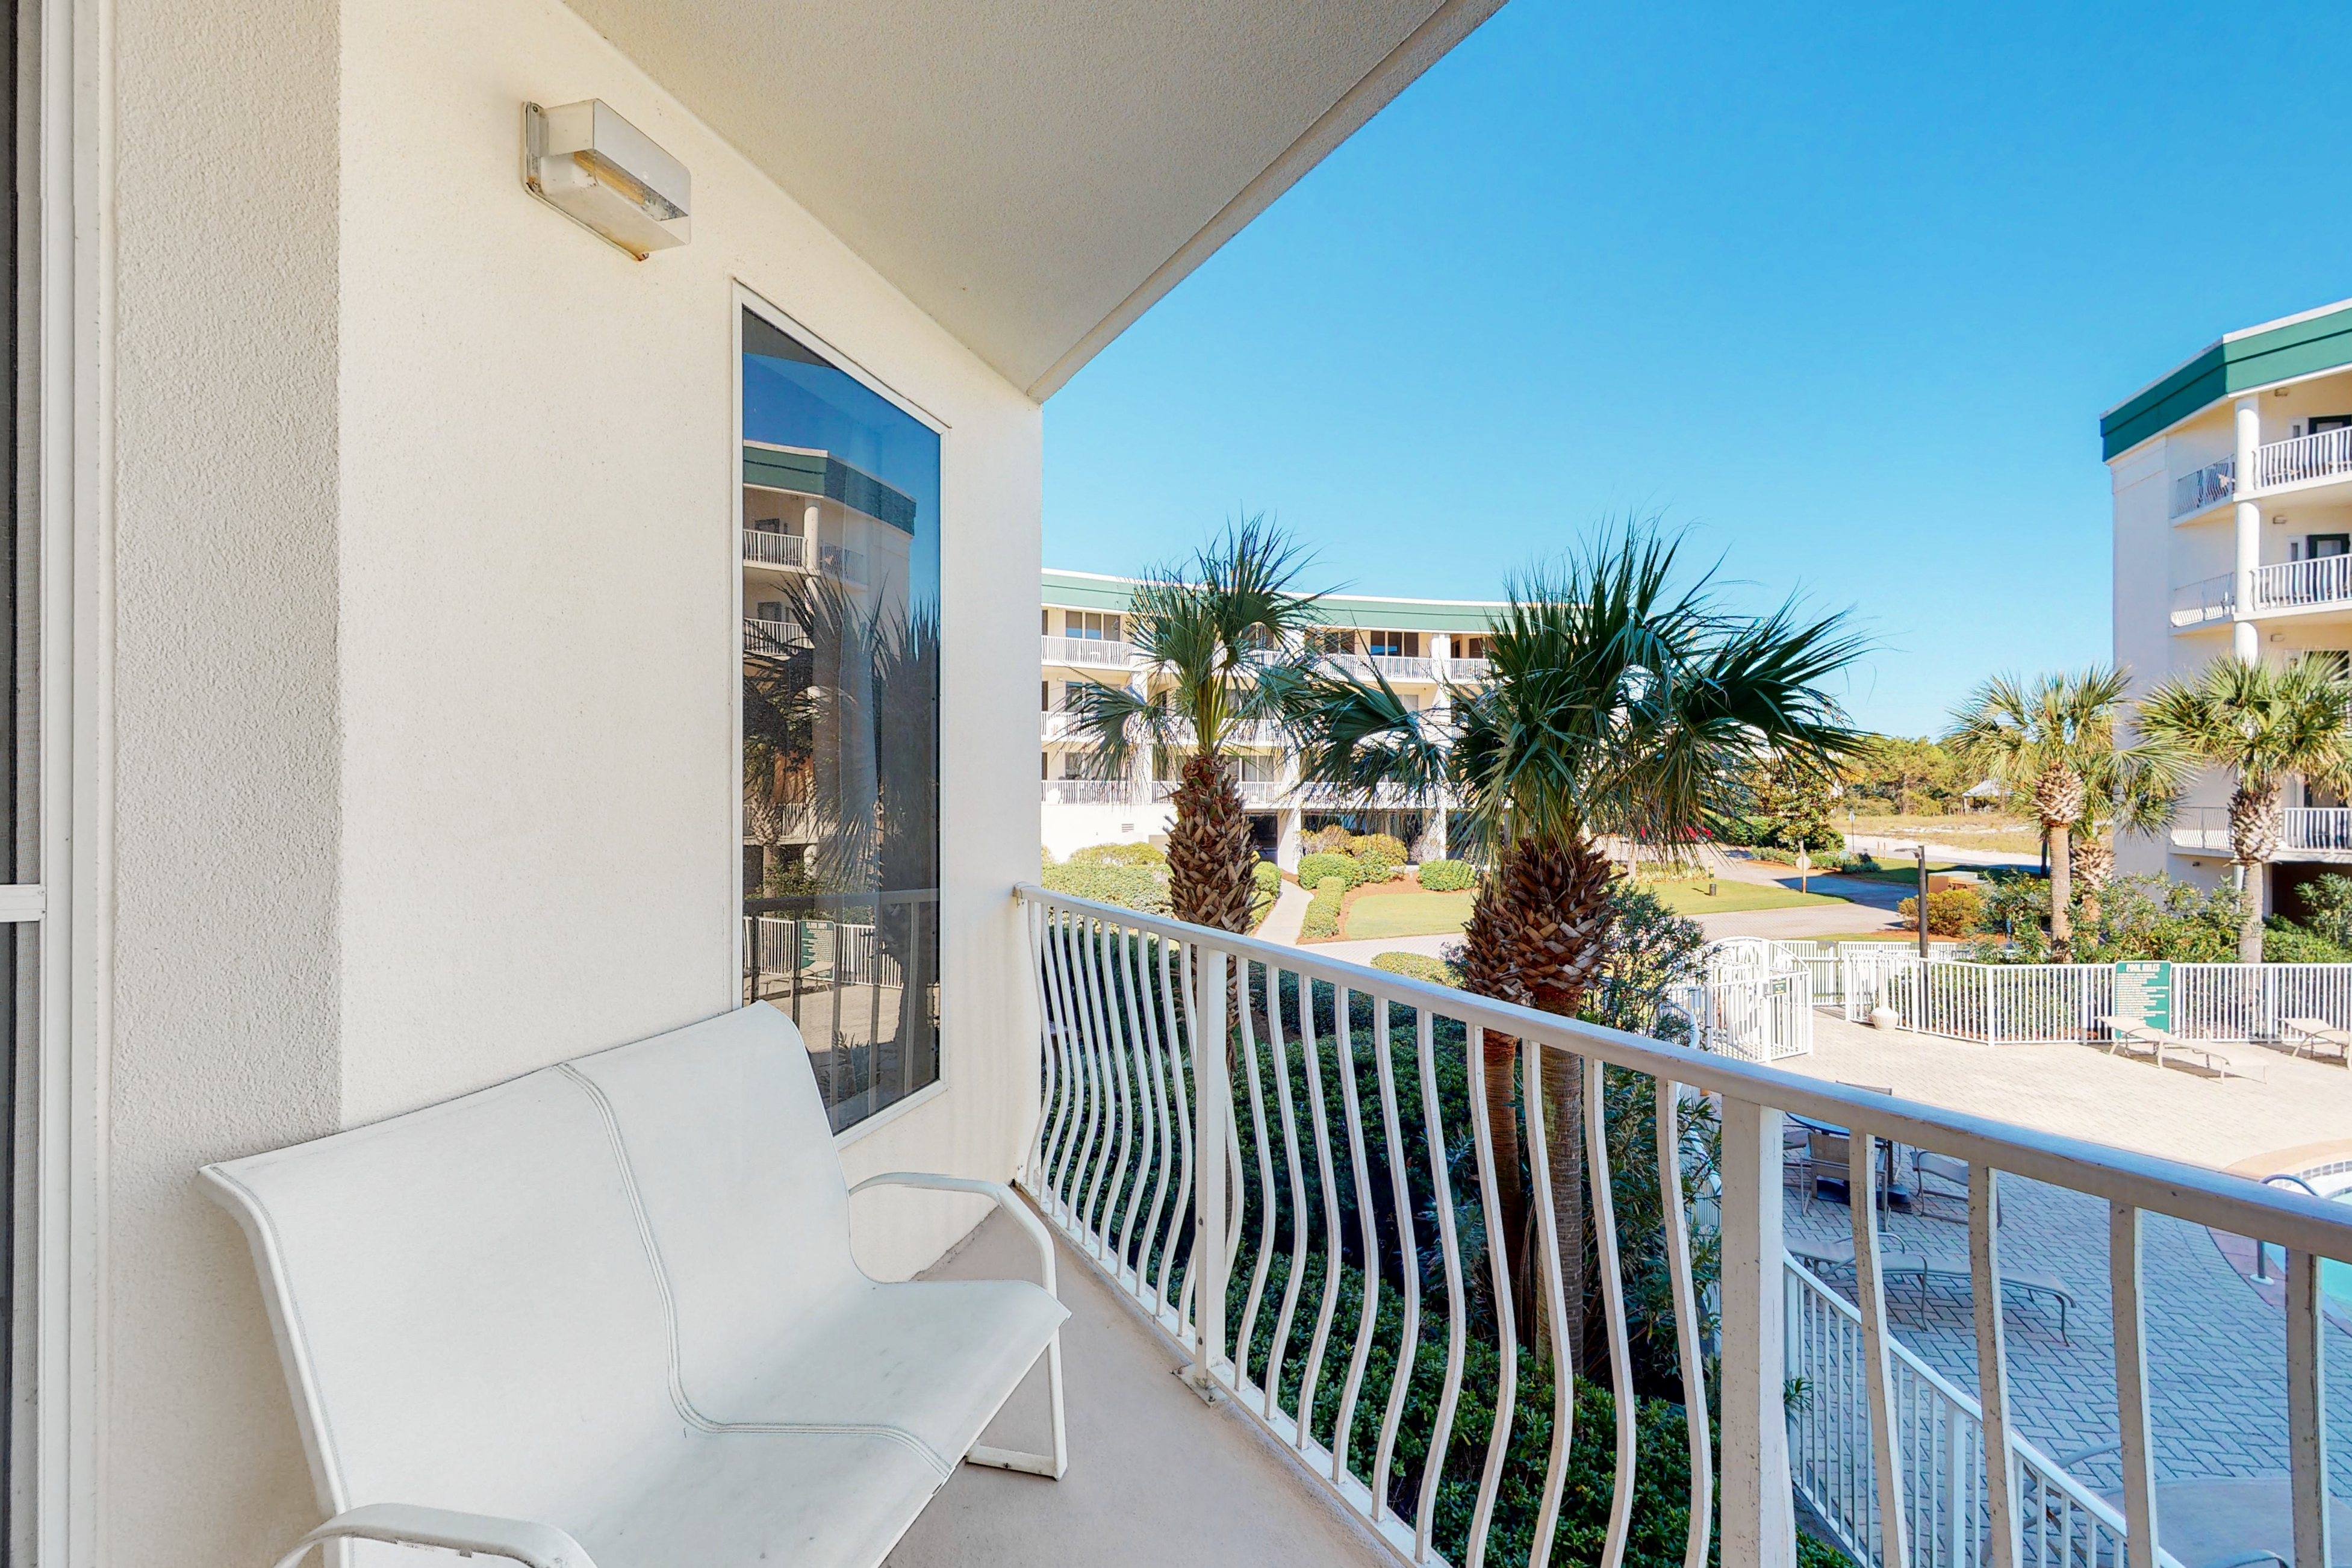 Dunes of Seagrove B101 Condo rental in Dunes of Seagrove in Highway 30-A Florida - #18